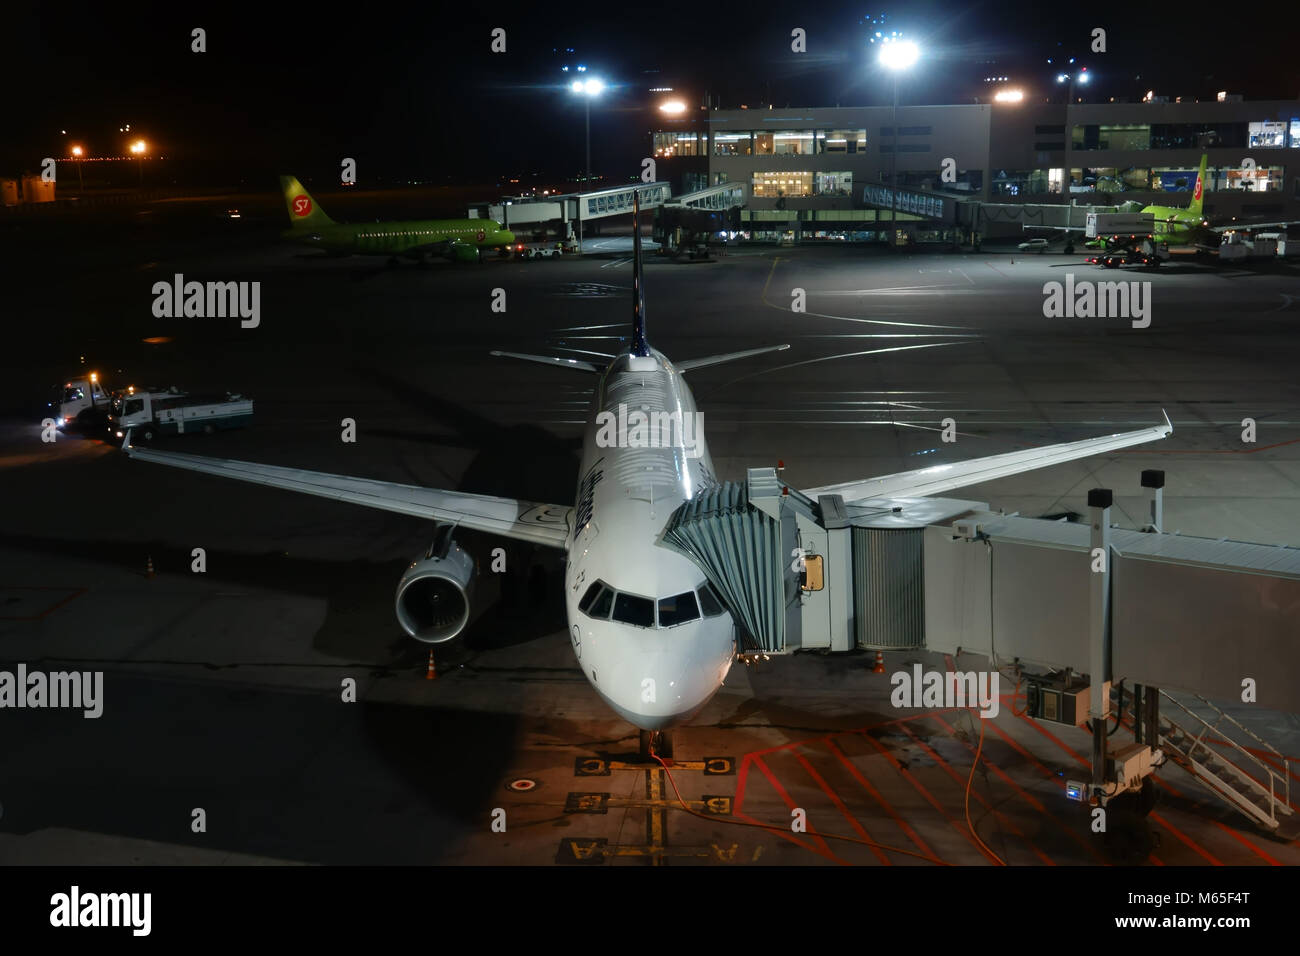 MOSCOW, RUSSIA - SEPTEMBER 02, 2017: airport Domodedovo at night, picking up the plane before departure. Refueling and loading. Stock Photo